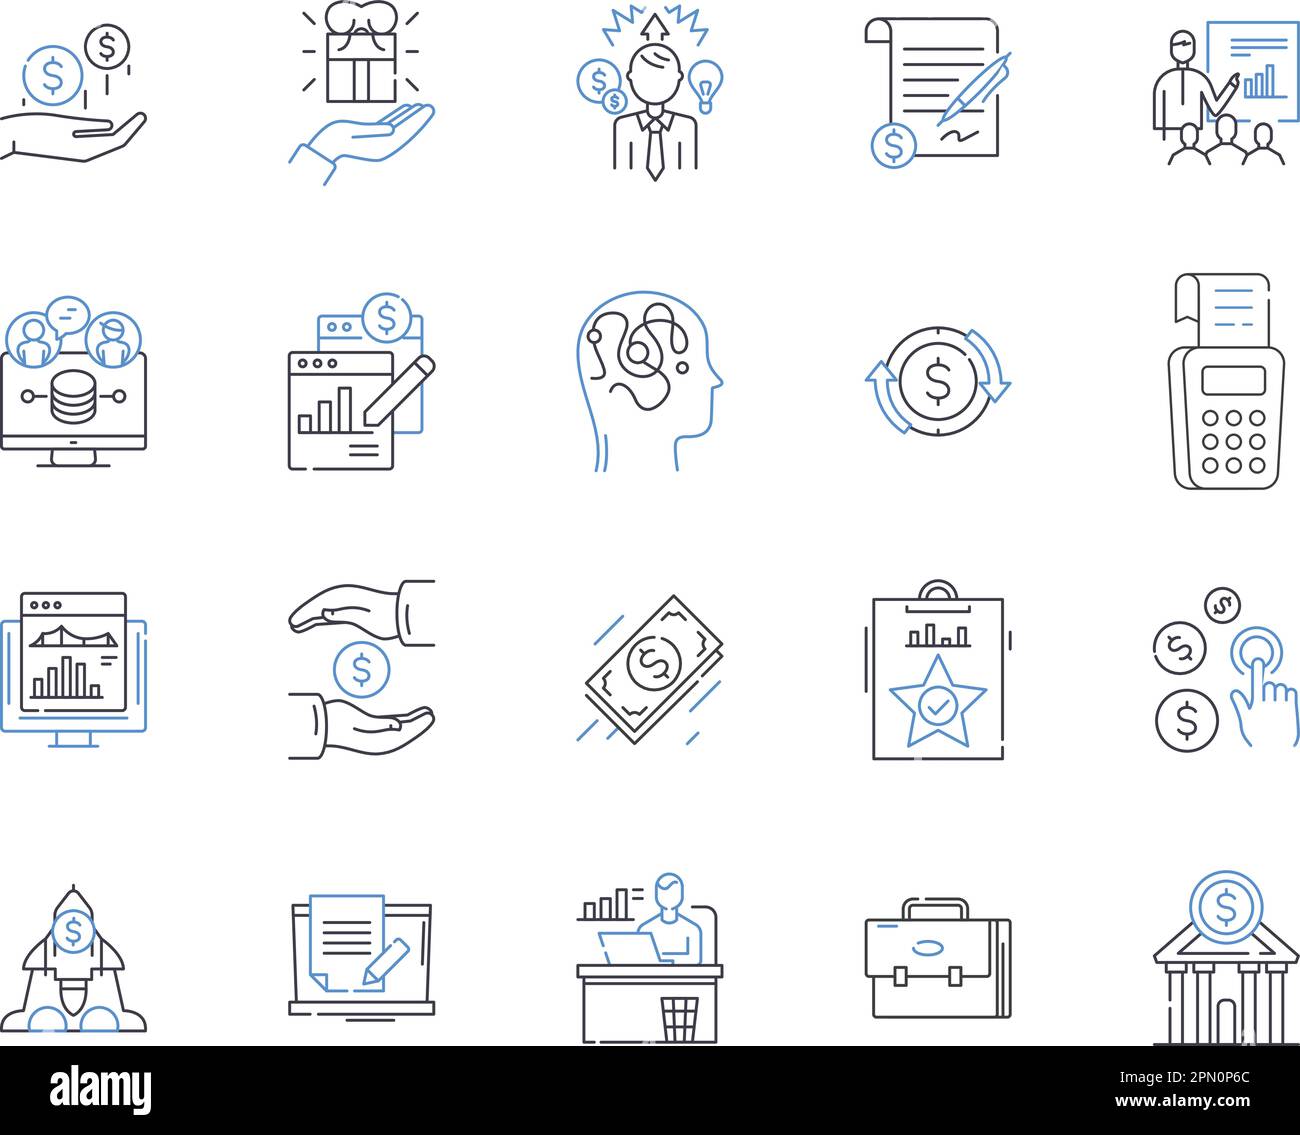 Bookkeeping outline icons collection. Bookkeeping, Accounting, Finances, Ledger, Records, Balance, Reconcile vector and illustration concept set Stock Vector